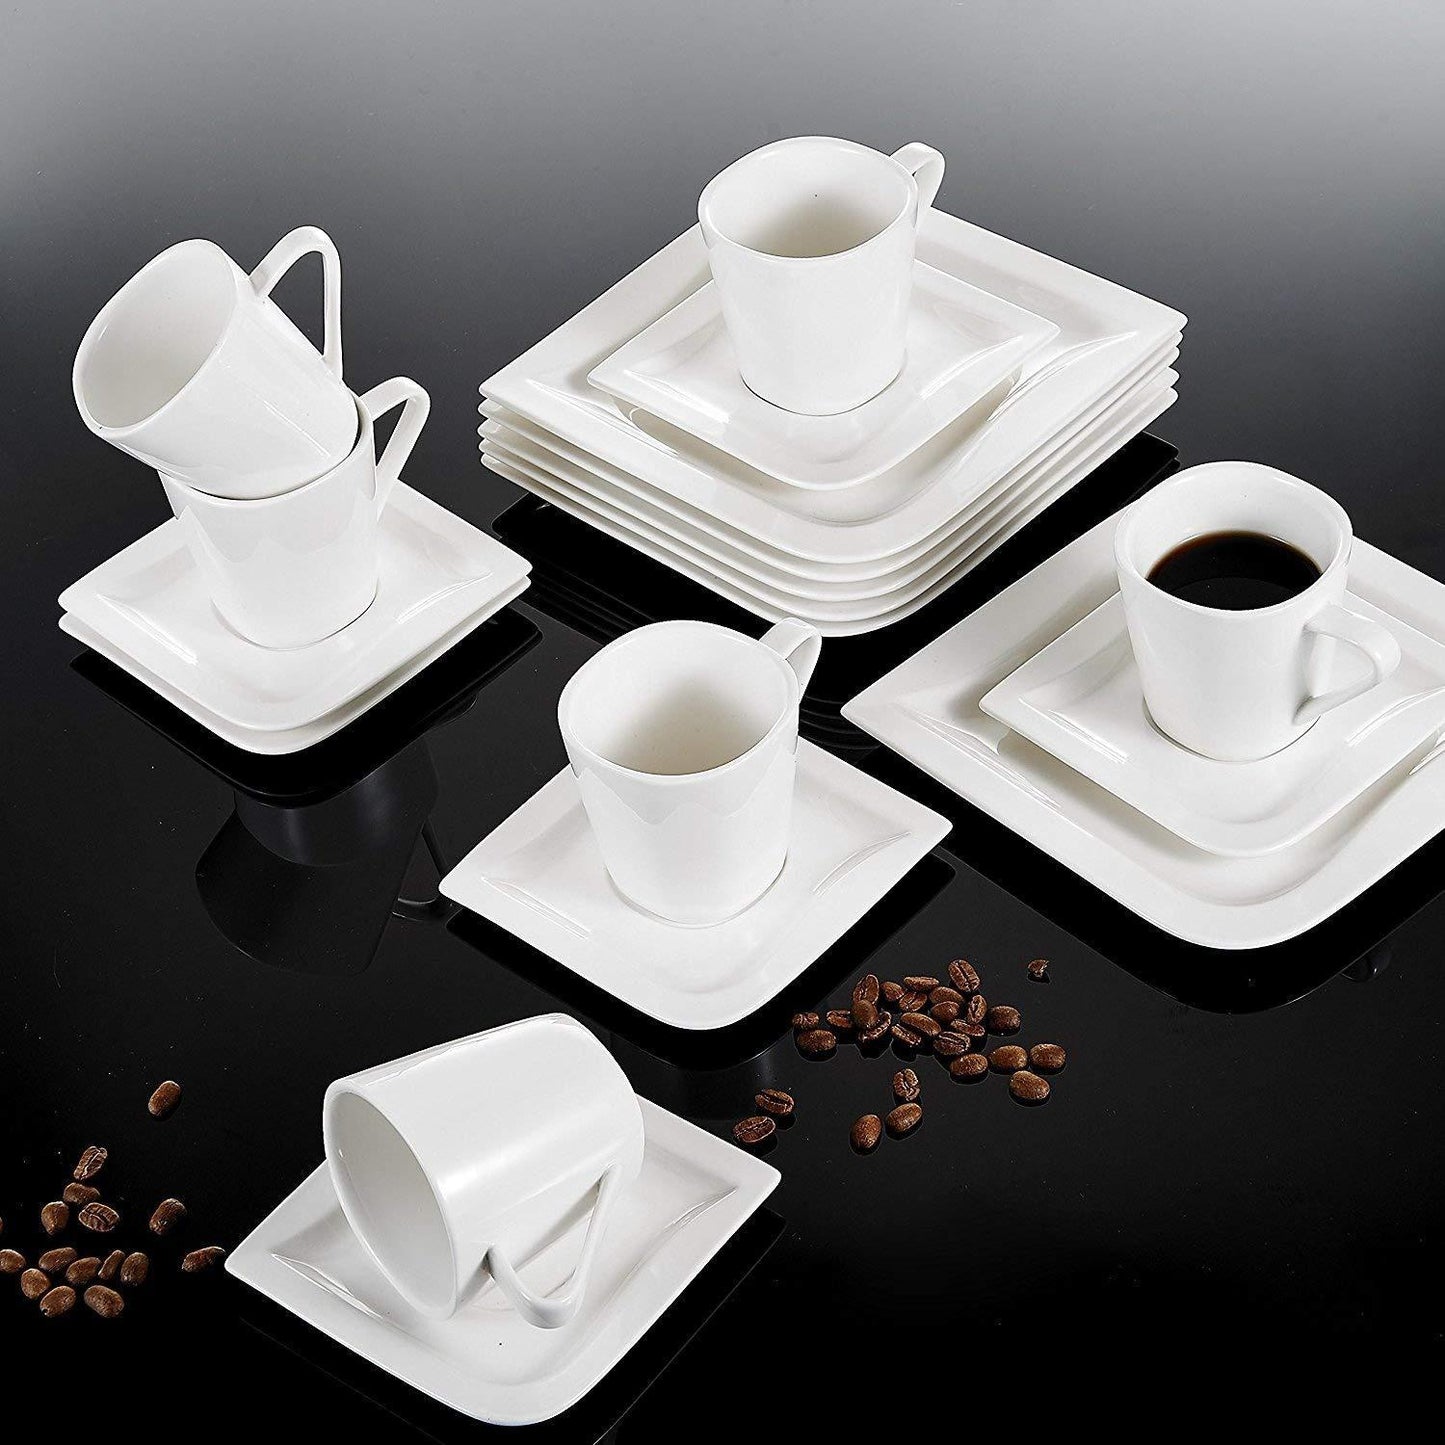 Joesfa 18-Piece Porcelain China Ceramic Tea Coffee Cups&Saucers Sets with 6-Piece Cups,Saucers and Dessert Plates - Nordic Side - 18, and, Ceramic, China, Coffee, CupsSaucers, Dessert, Joesfa